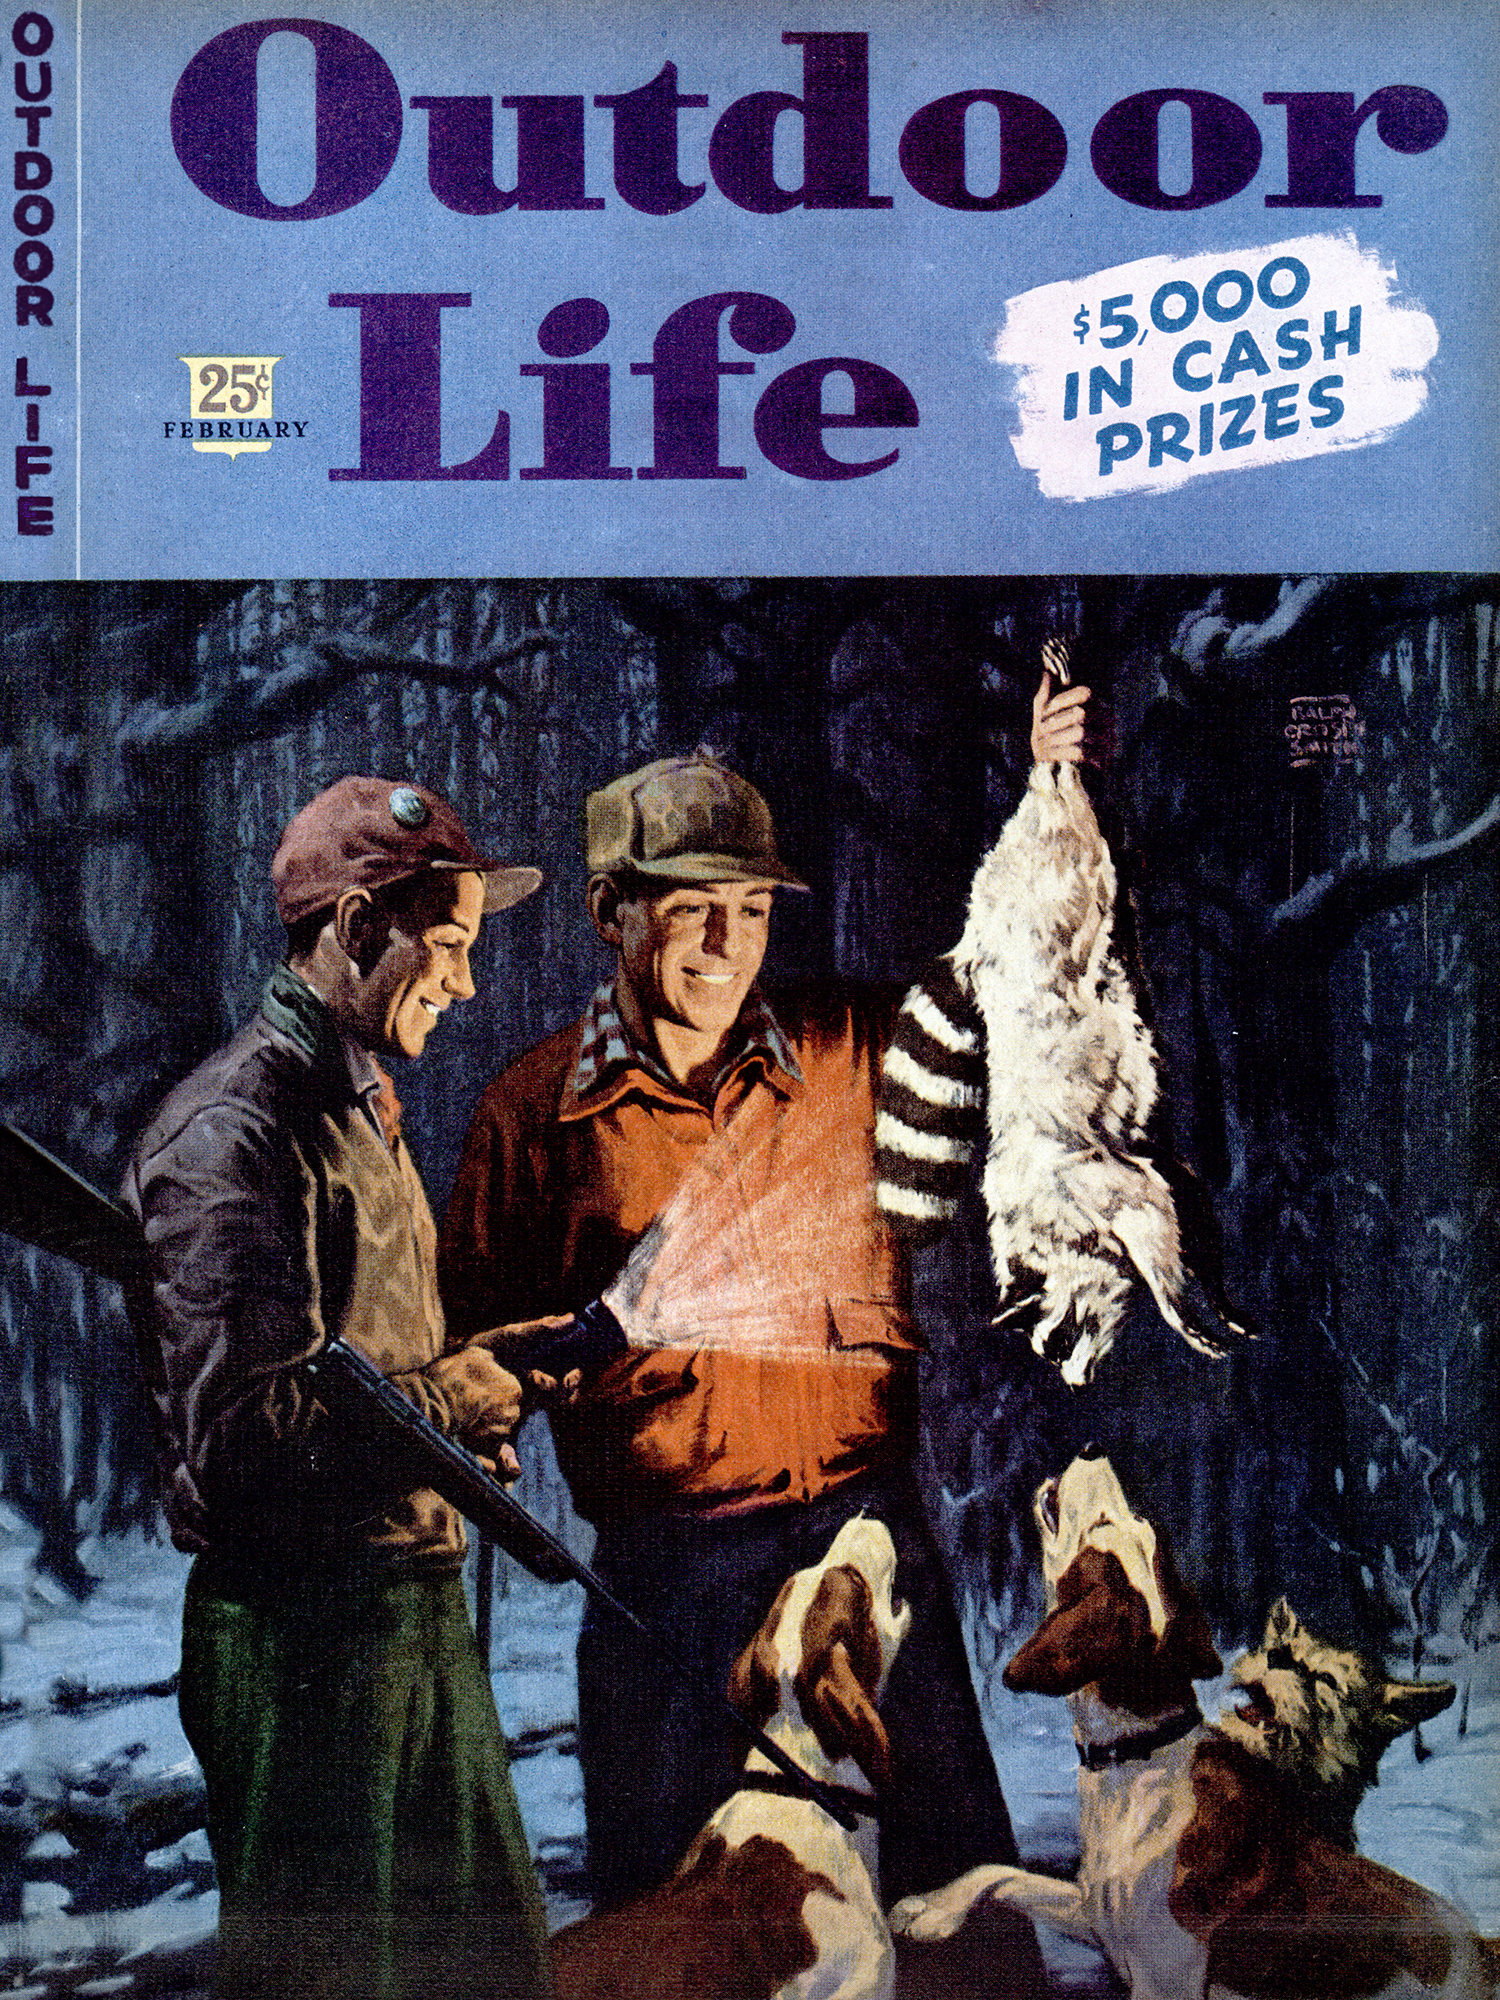 February 1946: Raccoon hunting and hound dog covers were common in the ’40s and ’50s.